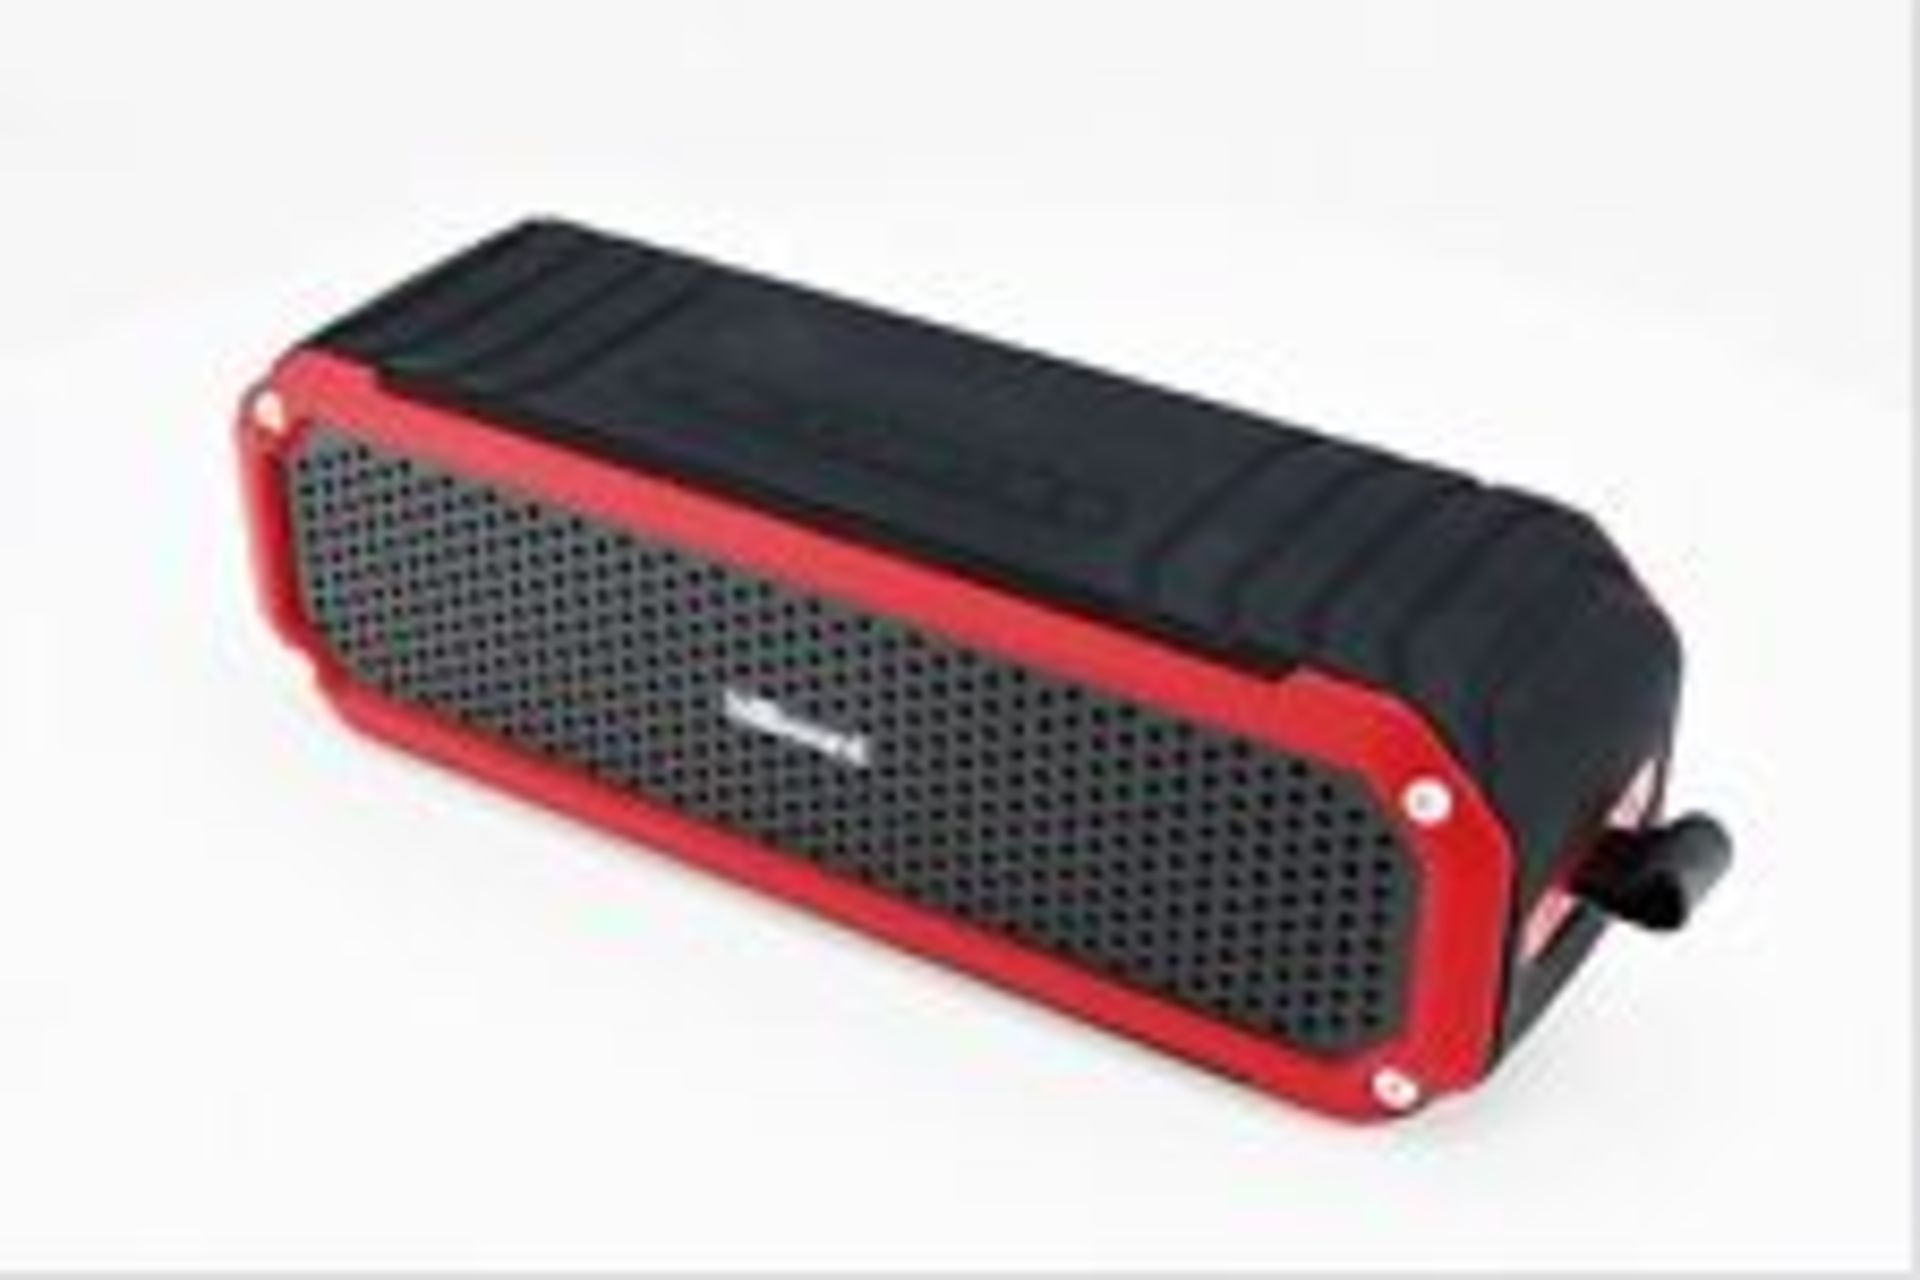 V Brand New Billboard Rugged Wireless Speaker - Soft Touch Silicon Body IPx Water Resistant Built In